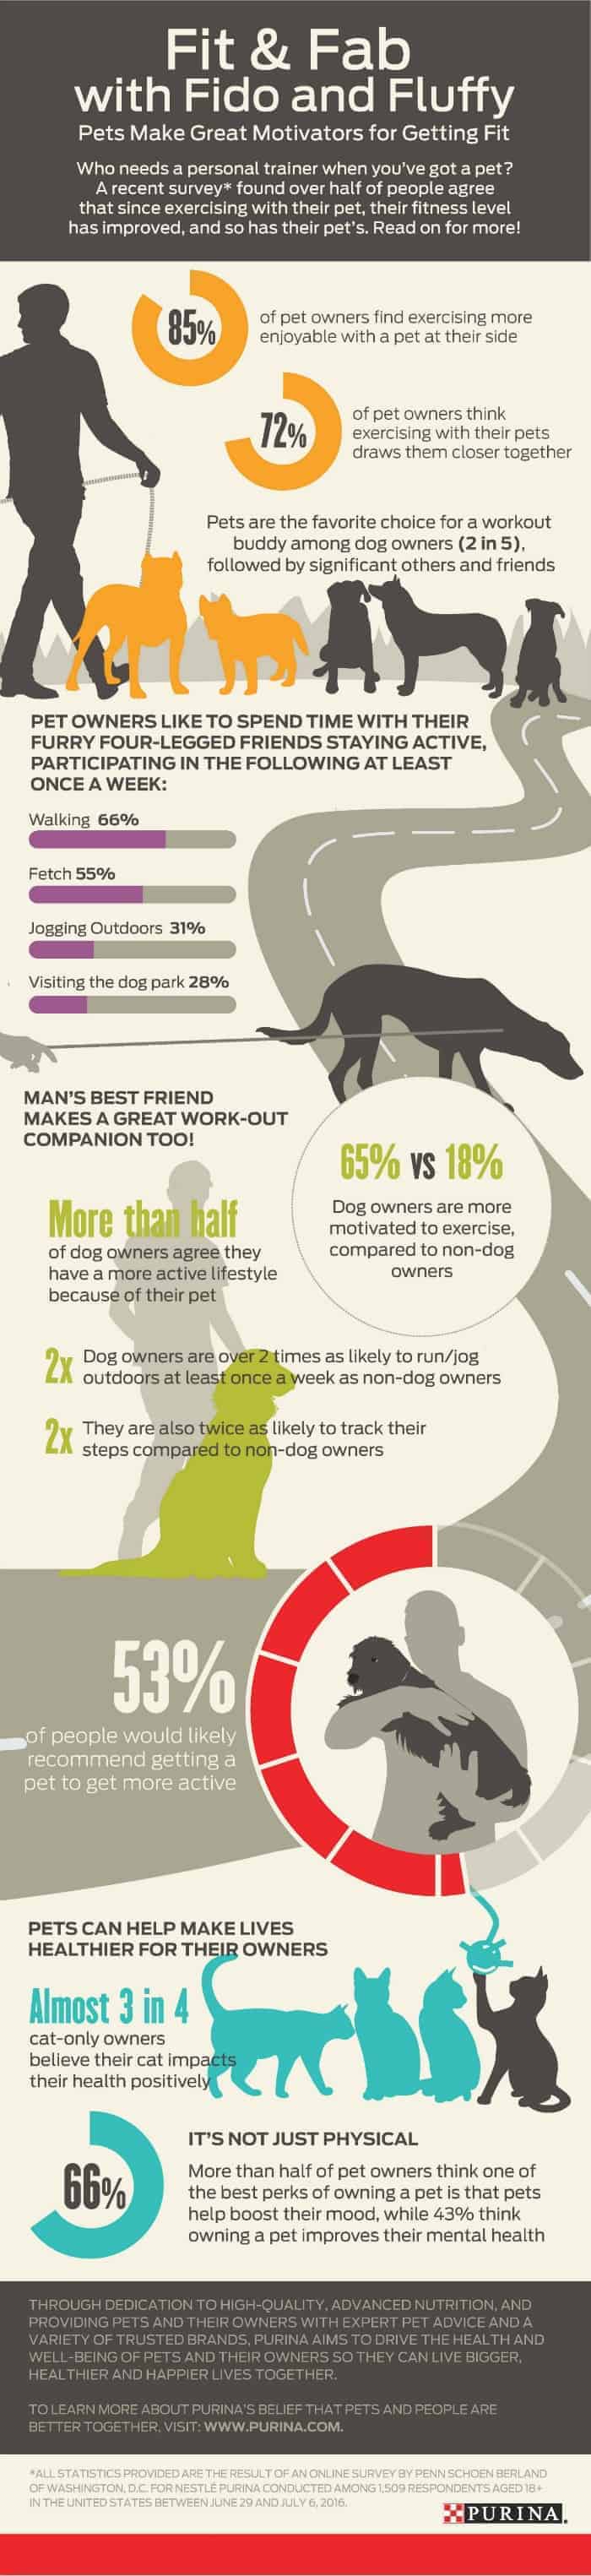 Purina Fitness with Pets Infographic